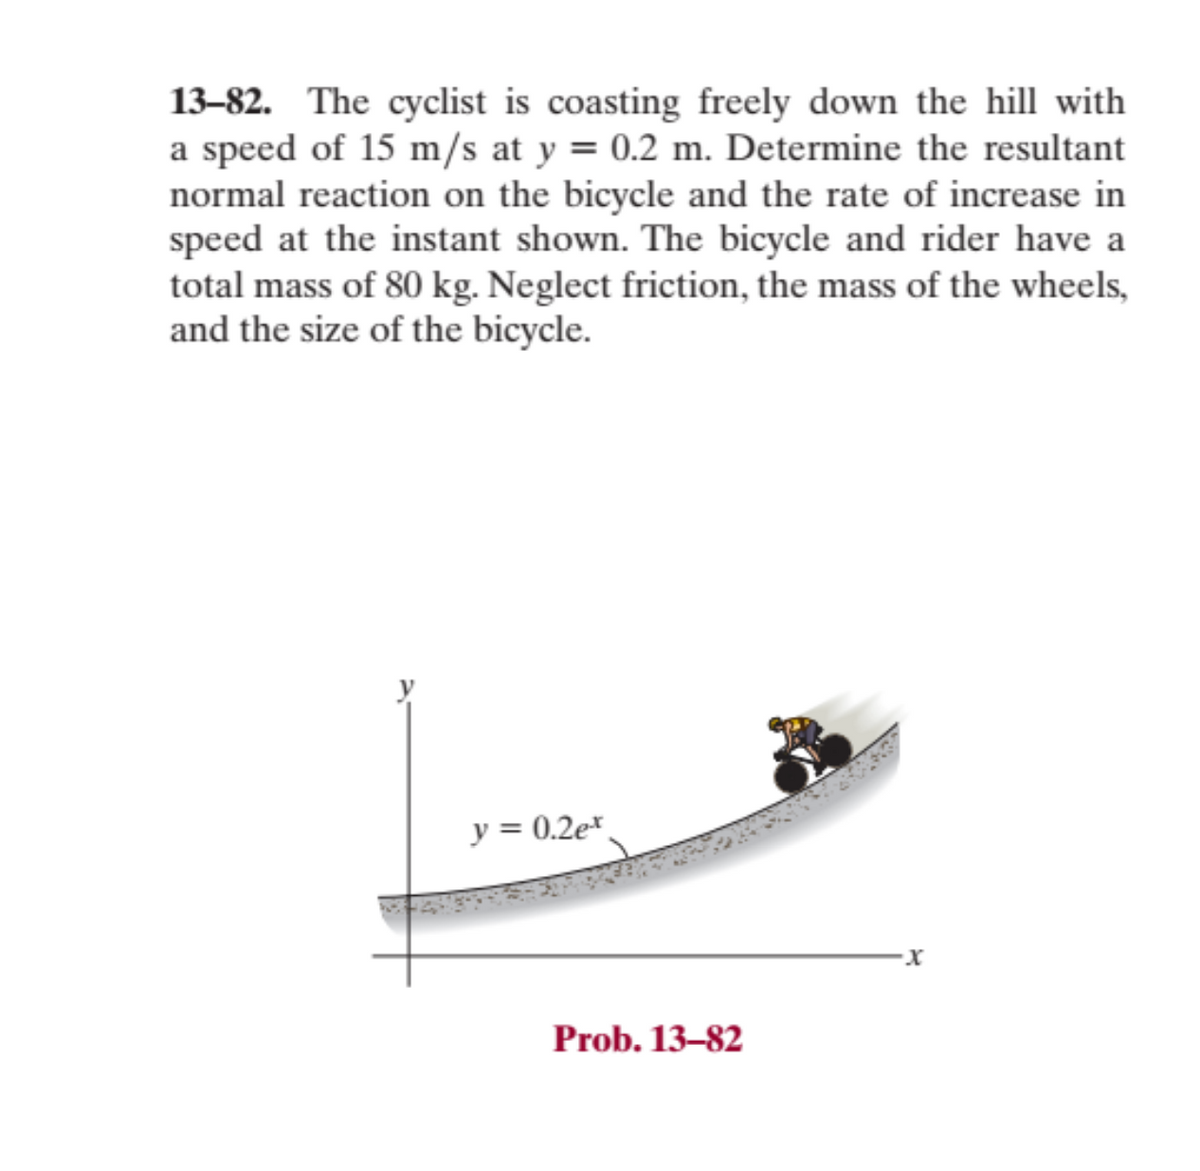 13-82. The cyclist is coasting freely down the hill with
a speed of 15 m/s at y = 0.2 m. Determine the resultant
normal reaction on the bicycle and the rate of increase in
speed at the instant shown. The bicycle and rider have a
total mass of 80 kg. Neglect friction, the mass of the wheels,
and the size of the bicycle.
y = 0.2e
Prob. 13-82